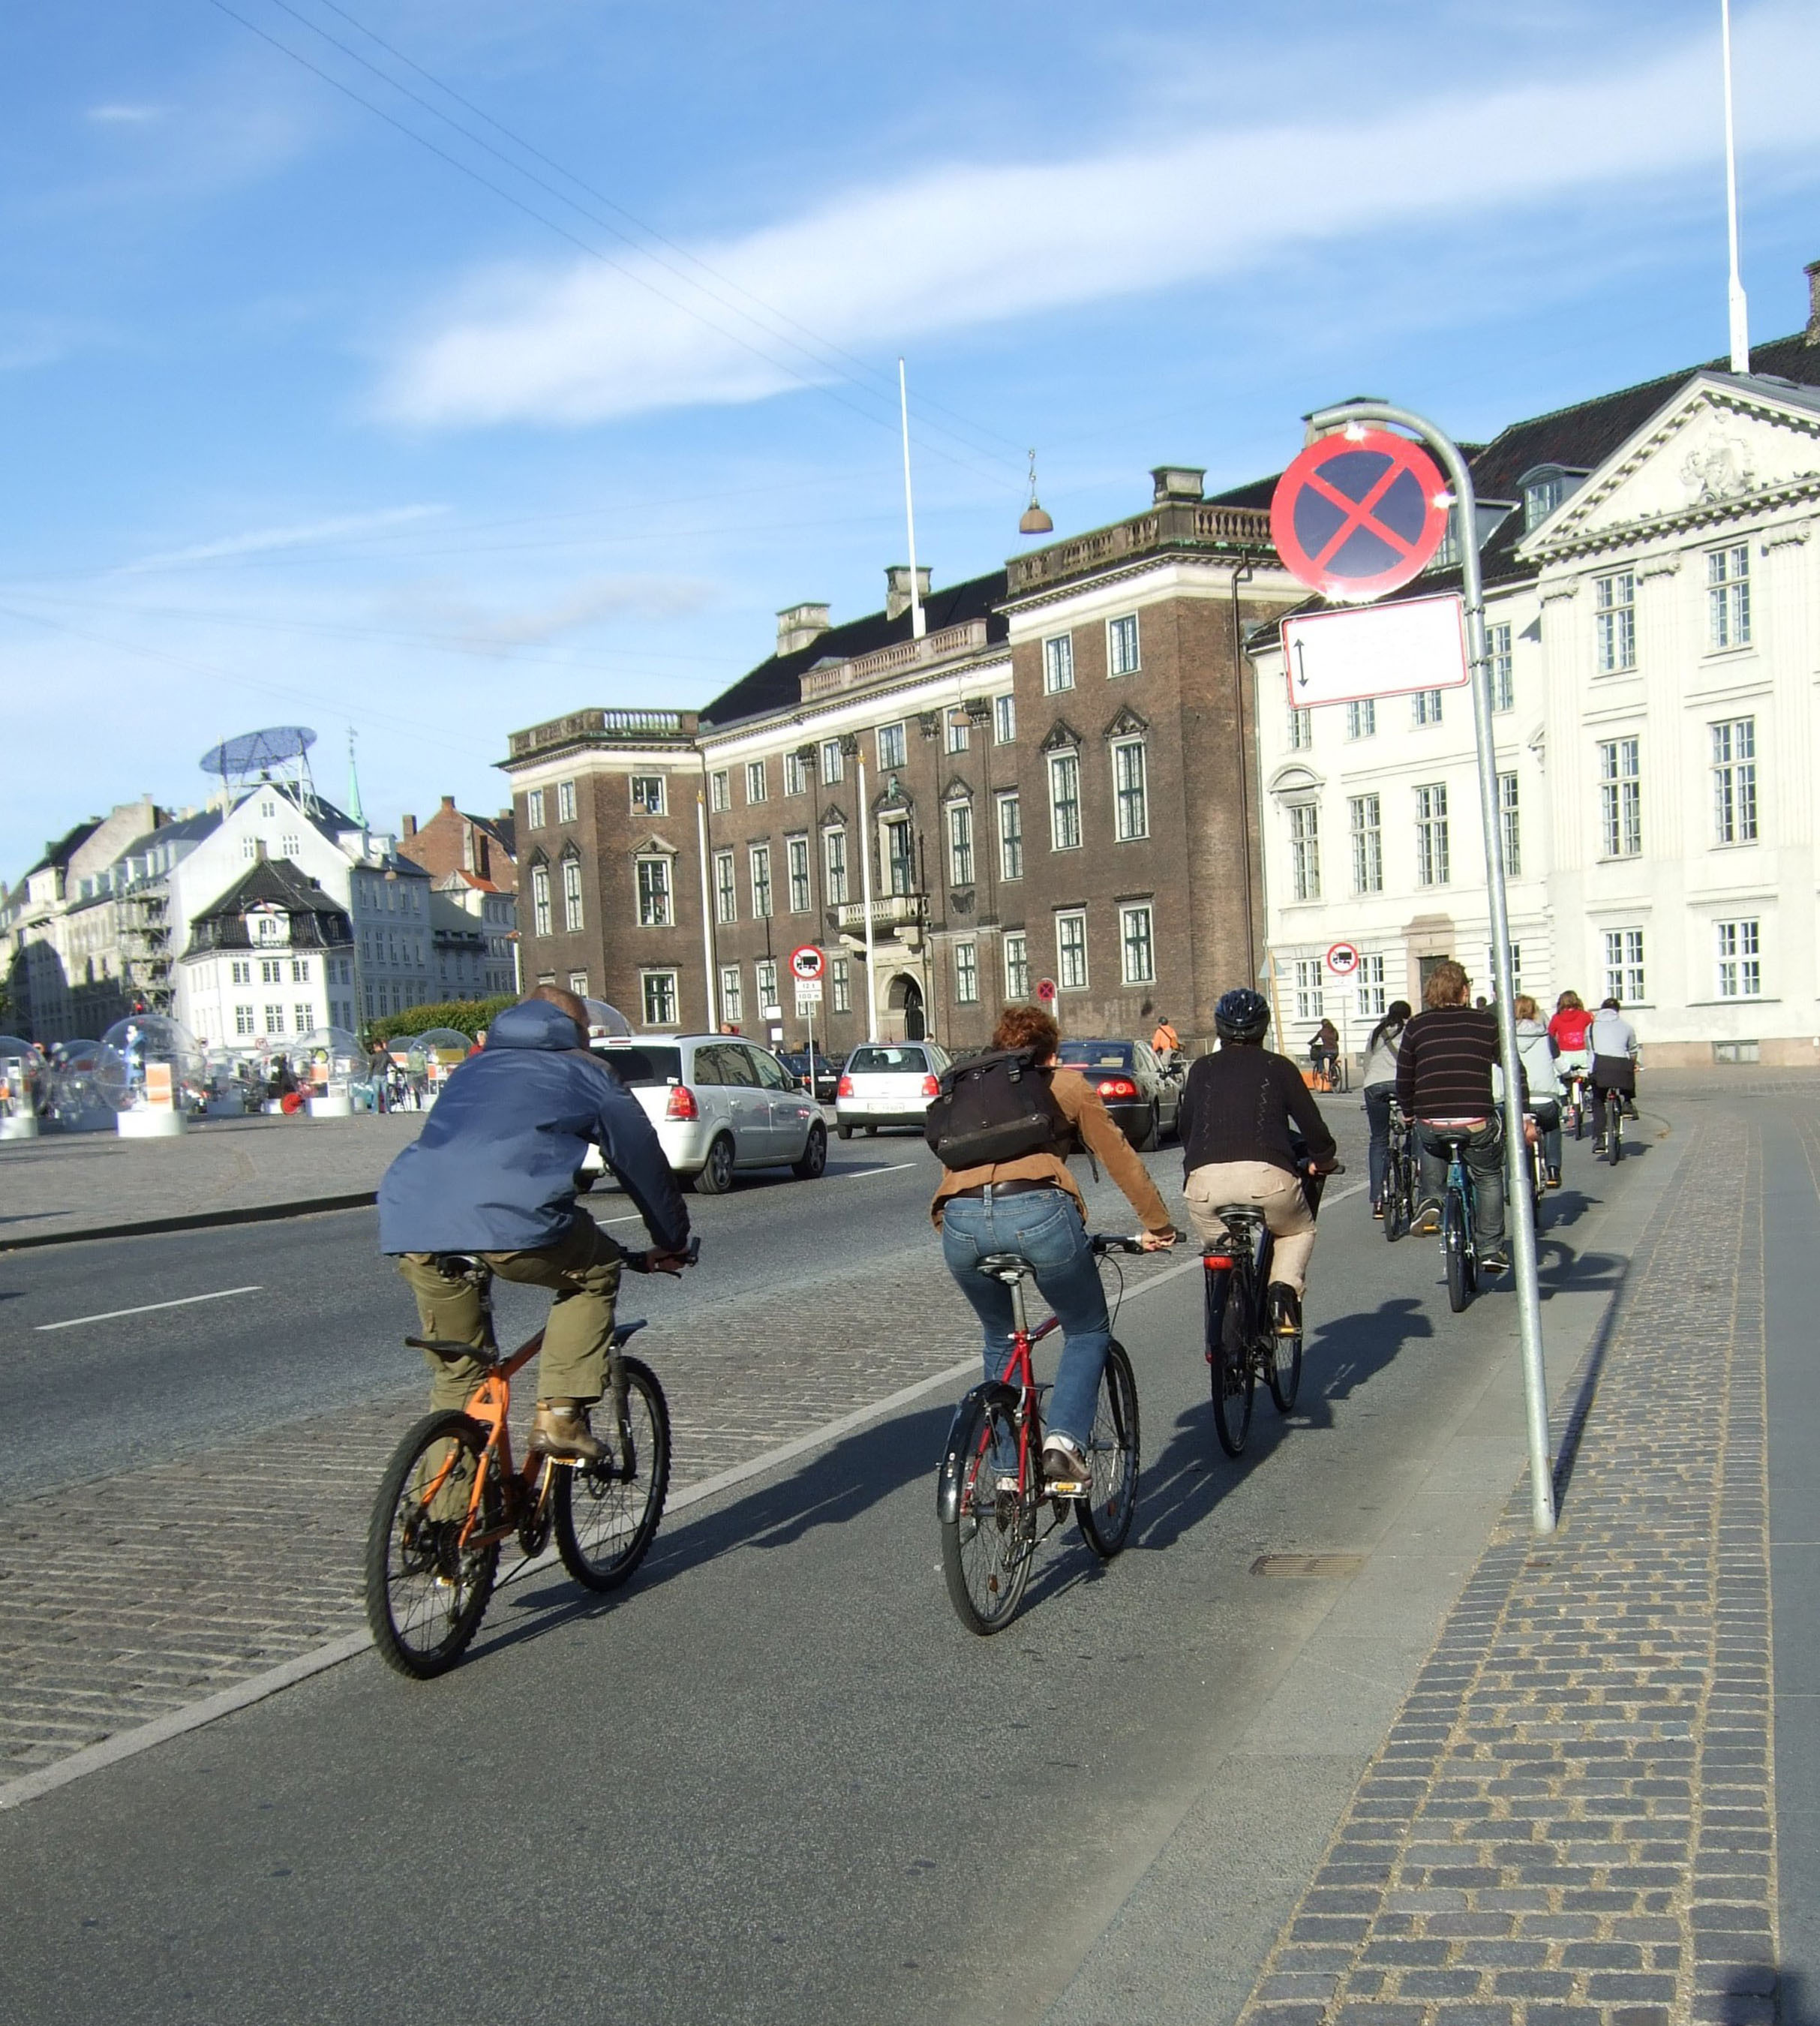 Bicycling in Copenhagen, a city whose ambition is to be the world’s leading bicycle city by 2015. (PRNewsFoto/Crystal Cruises)